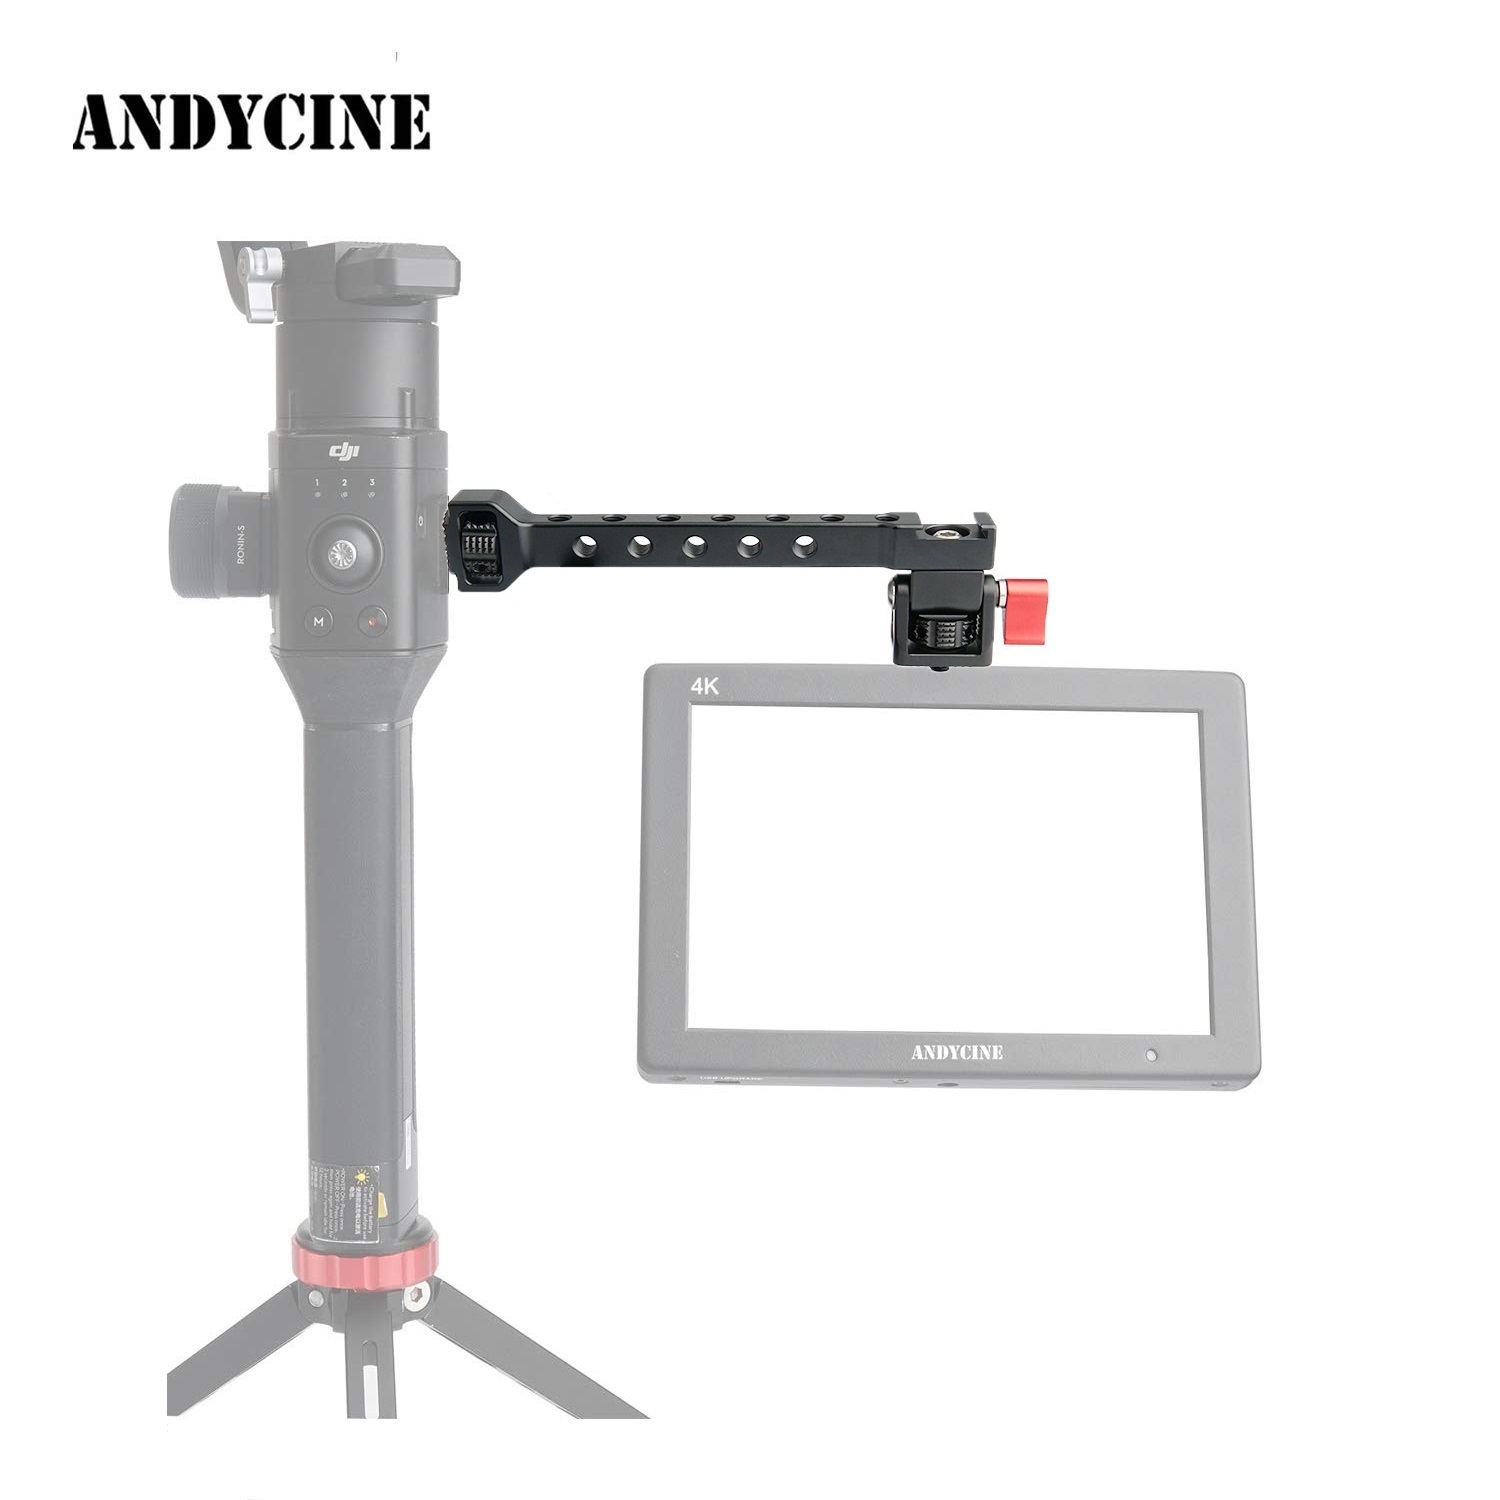 ANDYCINE Monitor Mount Arm for DJI Ronin-S